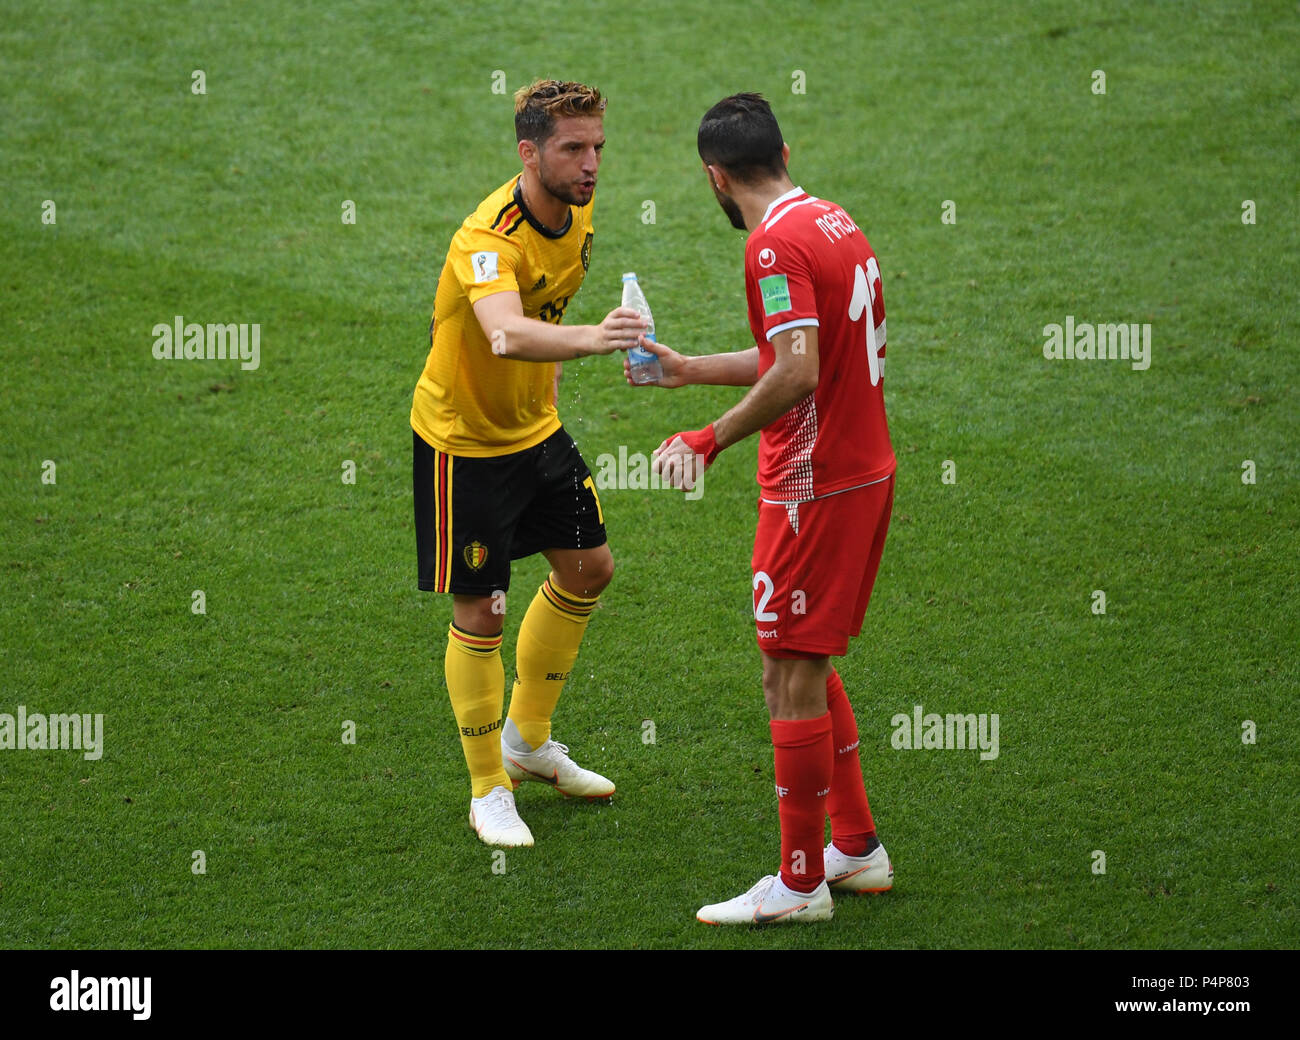 Moscow, Russia. 23rd June, 2018. Dries Mertens (L) of Belgium gives a bottle of water to Ali Maaloul of Tunisia during the 2018 FIFA World Cup Group G match between Belgium and Tunisia in Moscow, Russia, June 23, 2018. Credit: Wang Yuguo/Xinhua/Alamy Live News Stock Photo